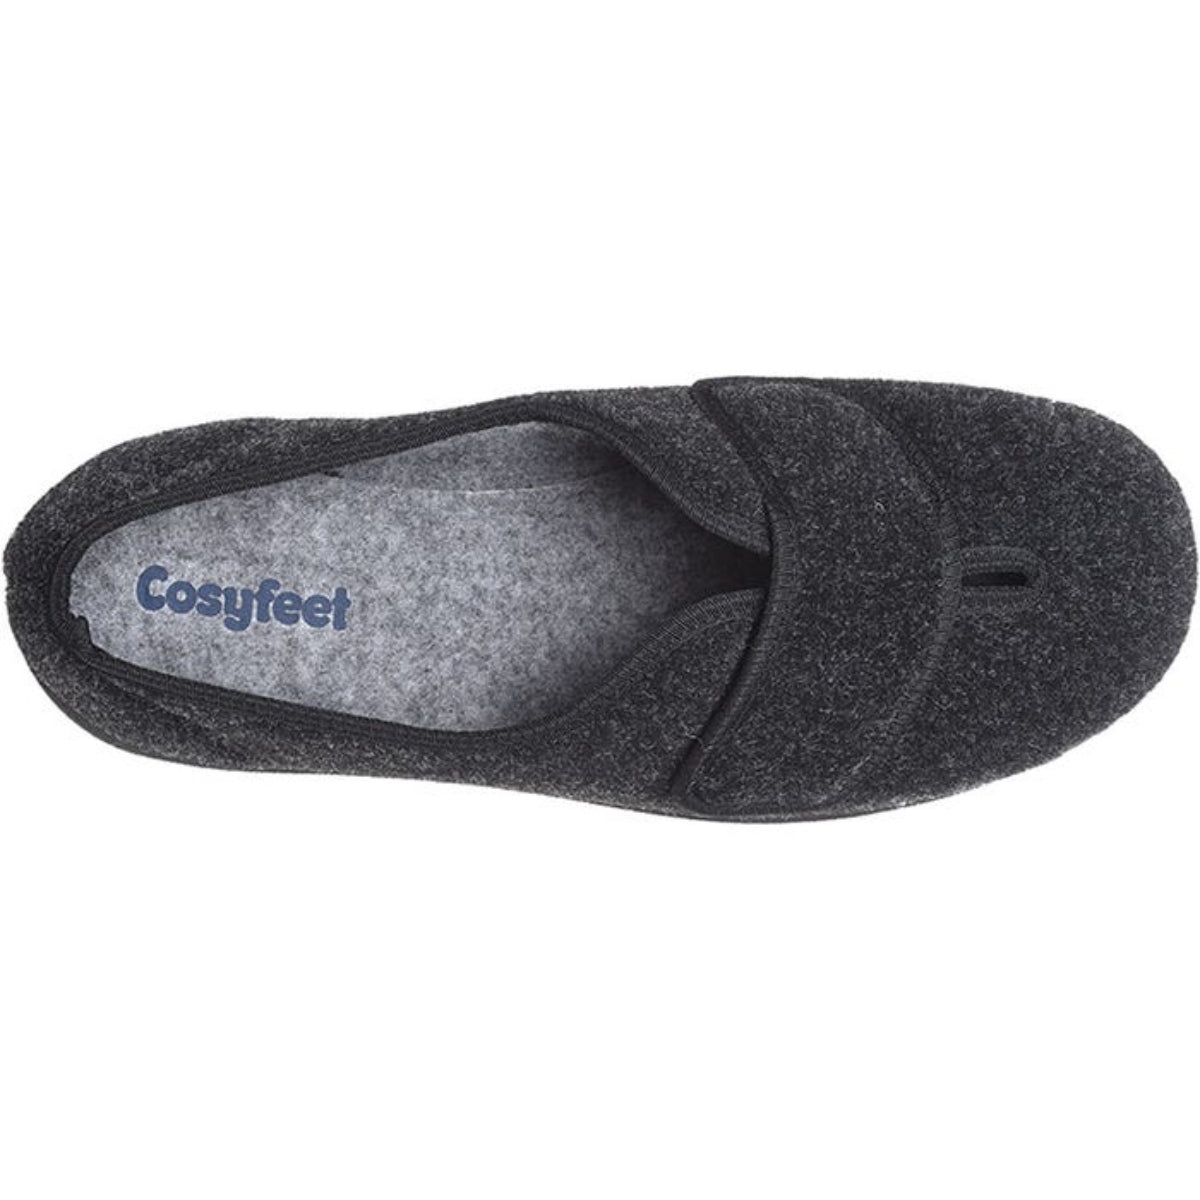 Ronnie Charcoal. Adjustable slip-on roomy slipper is cushioned underfoot. Ideal for problem toes